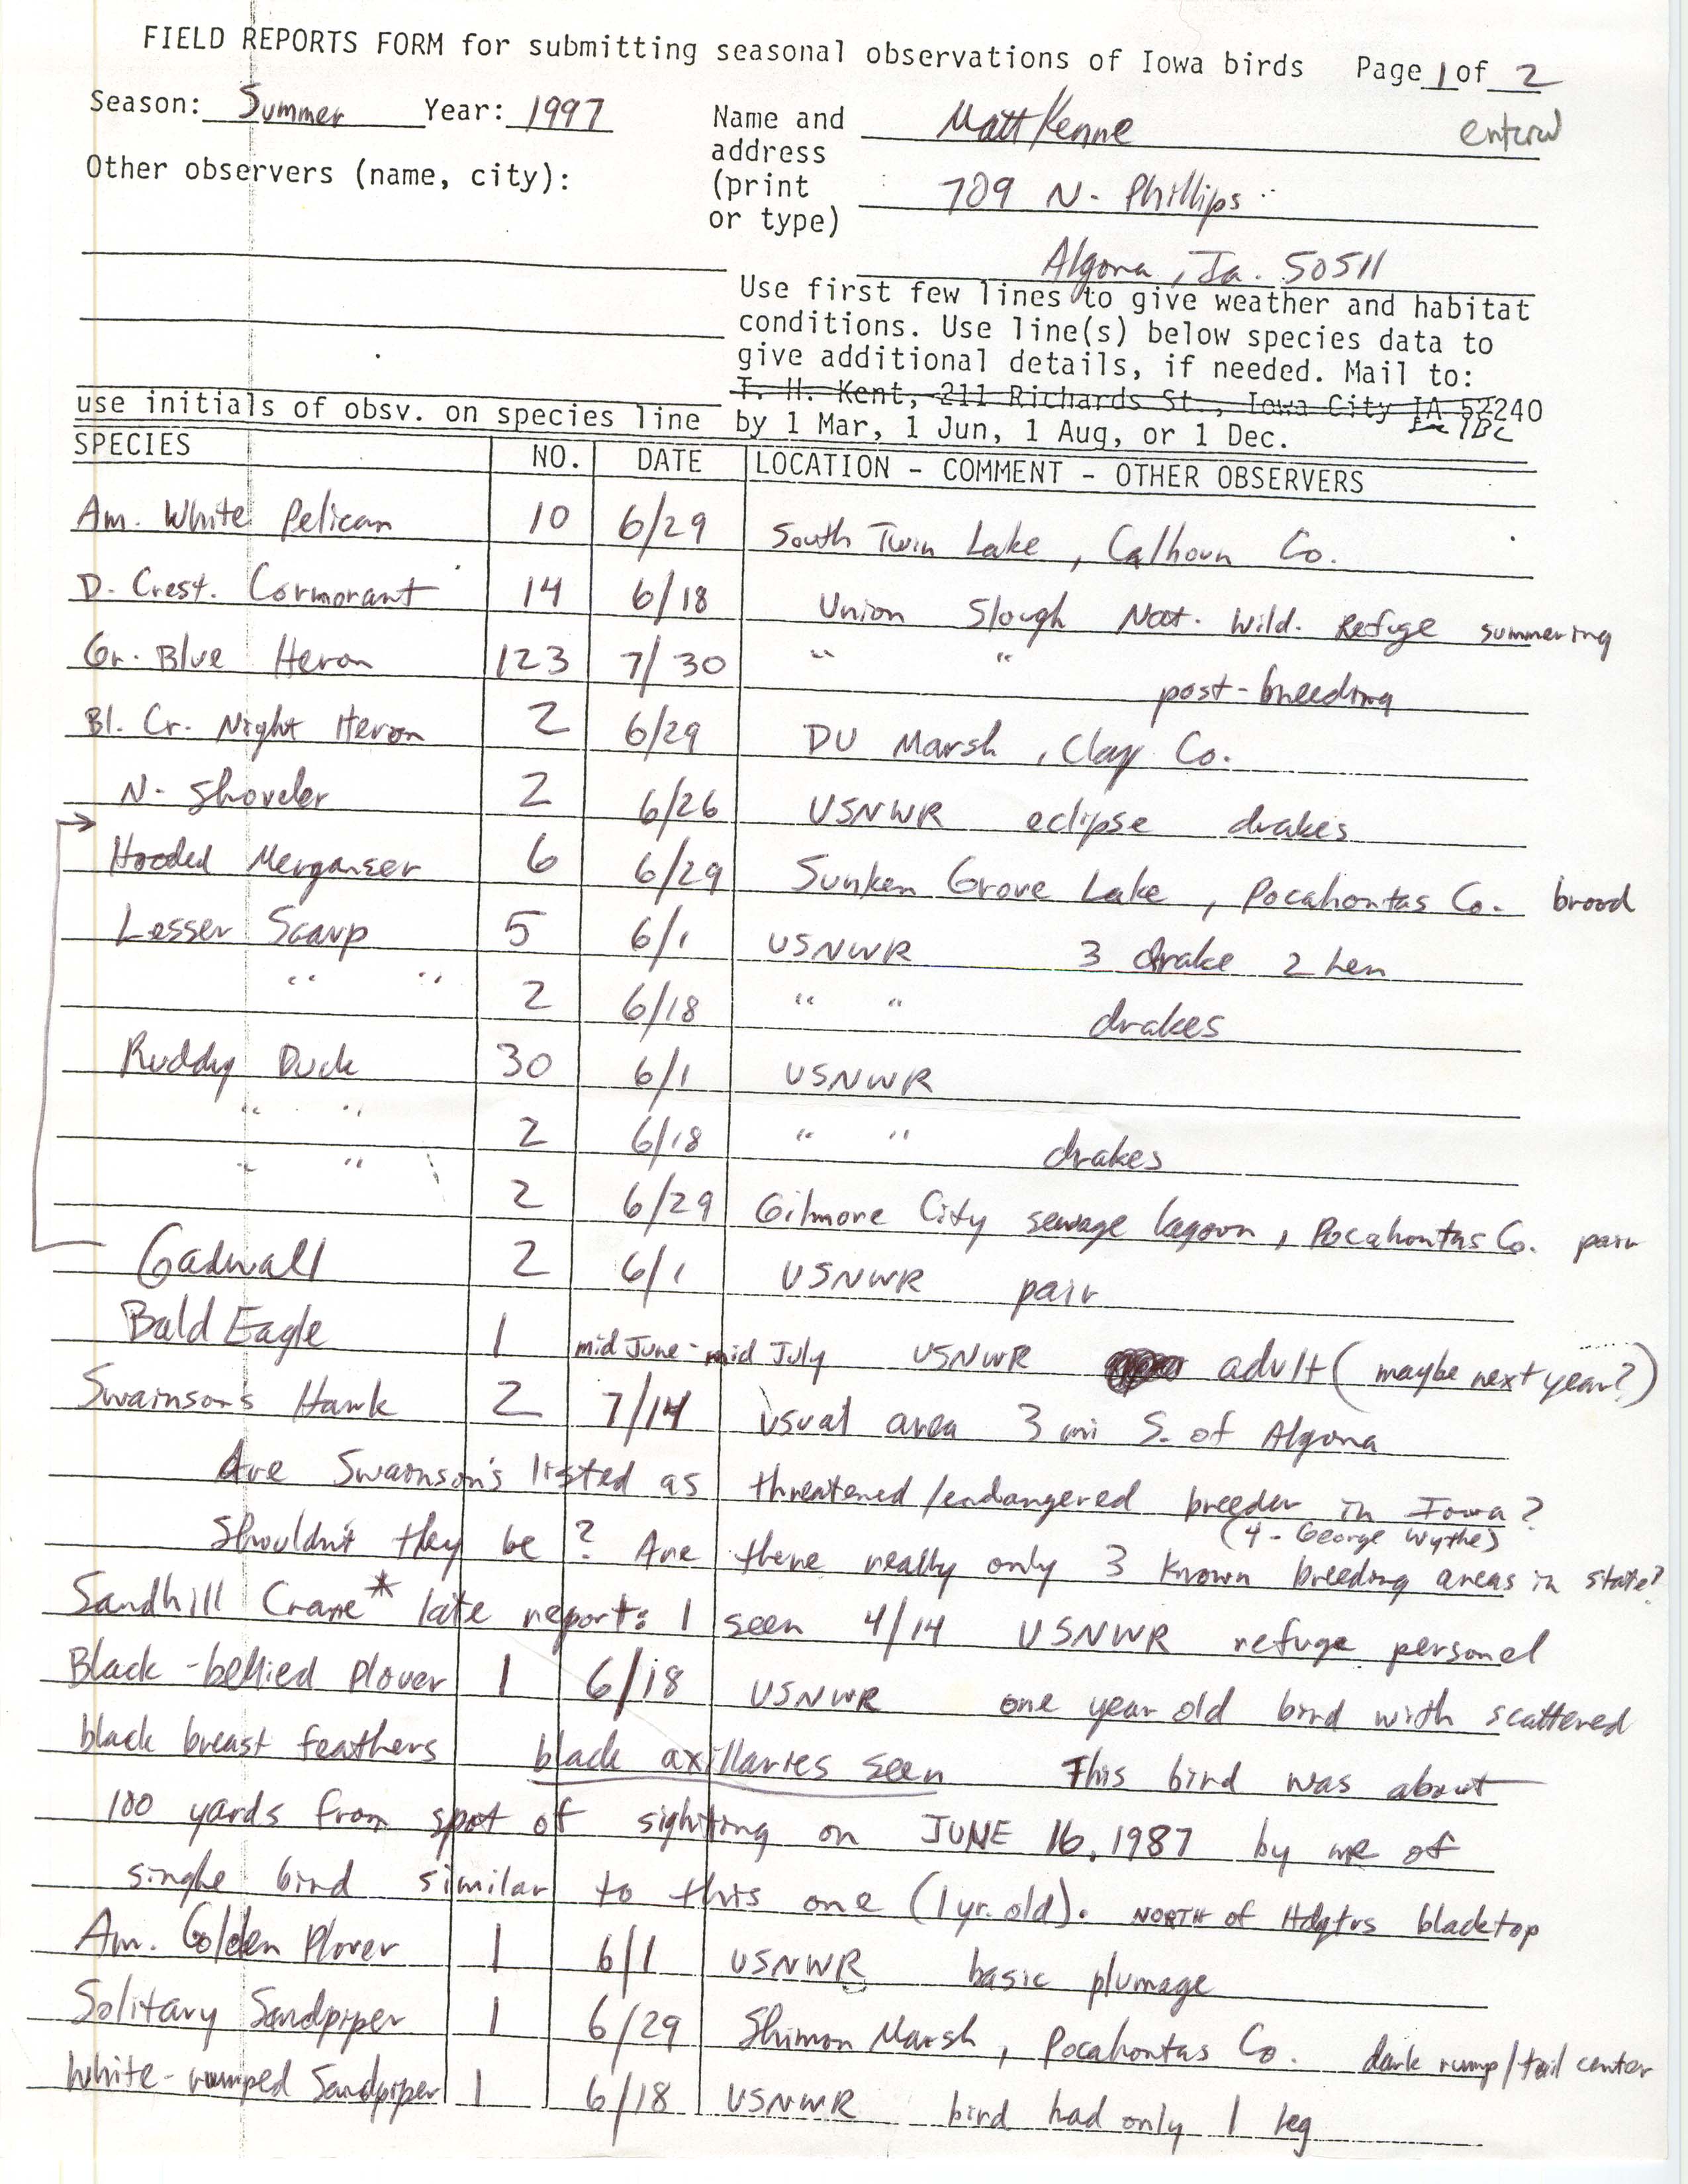 Field reports form for submitting seasonal observations of Iowa birds, Matthew Kenne, summer 1997